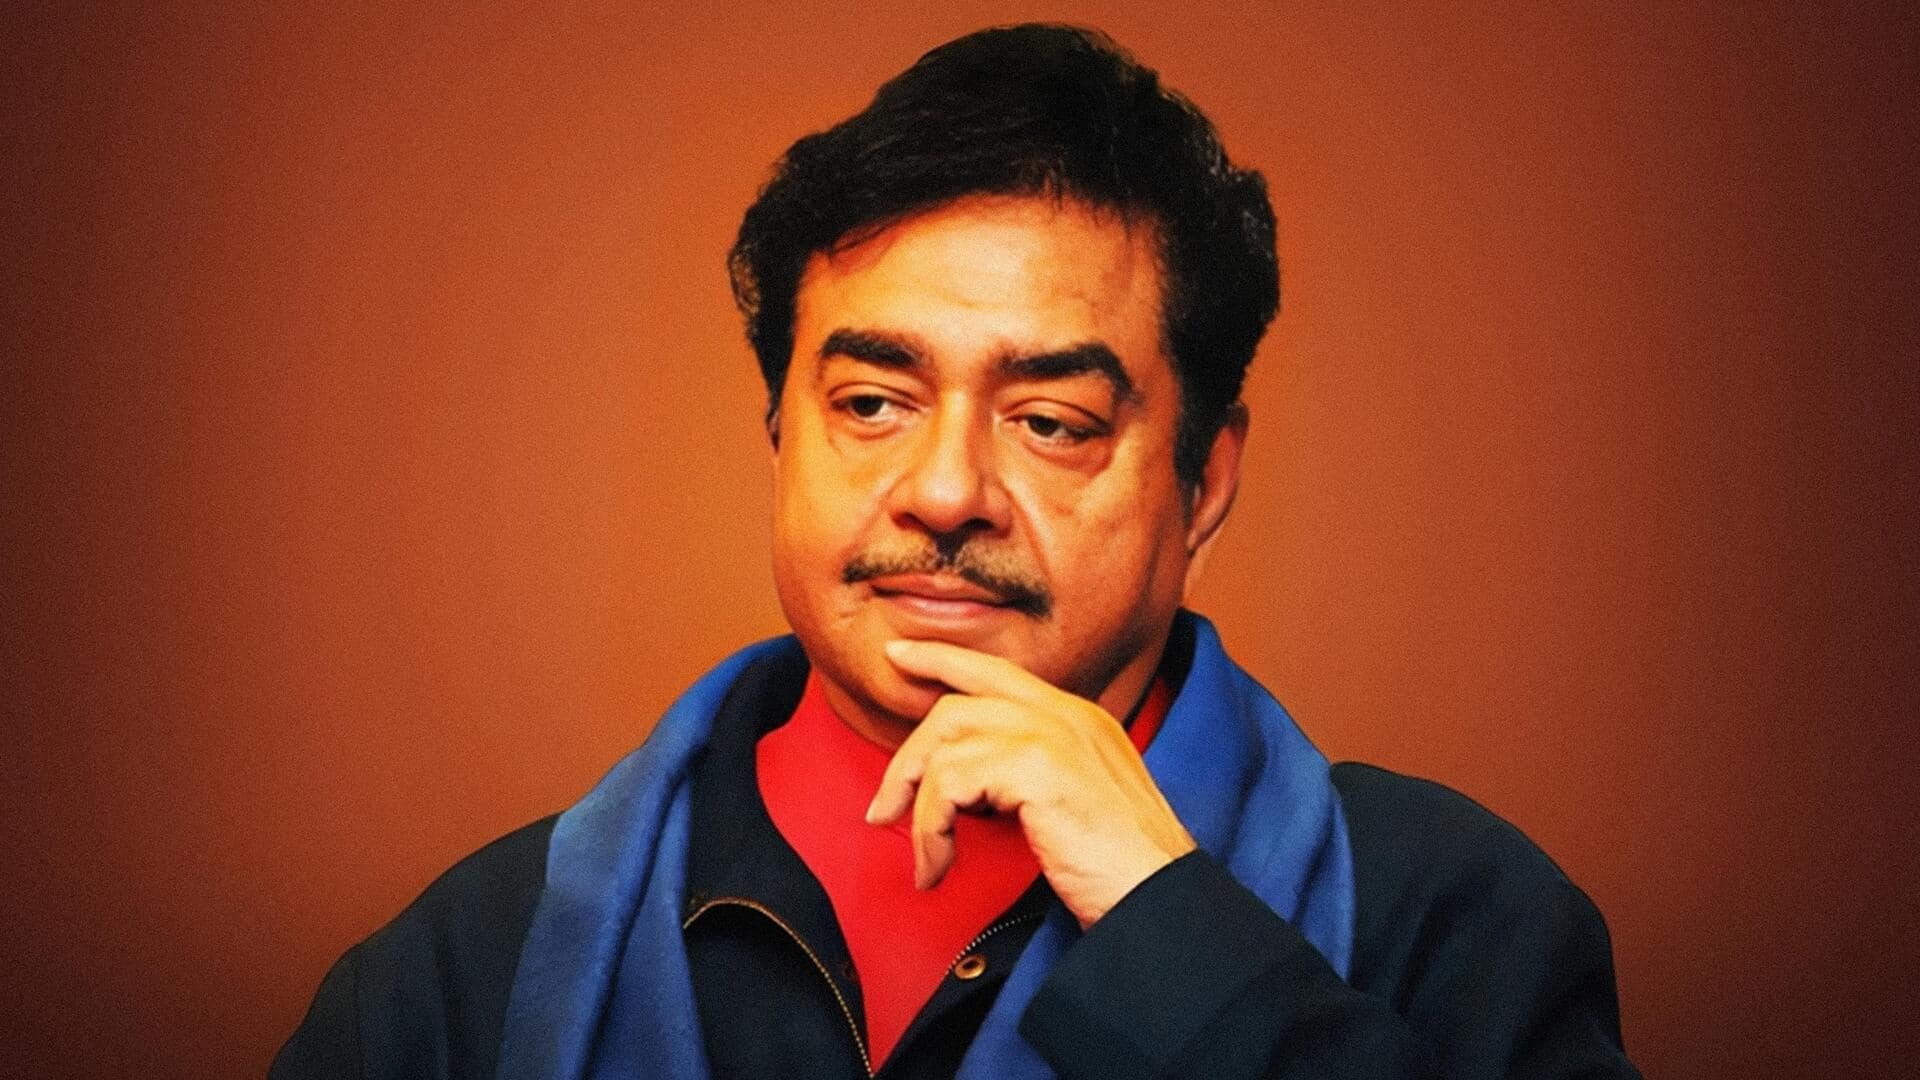 'Full of rapists': BJP jibes TMC after Shatrughan Sinha's nomination